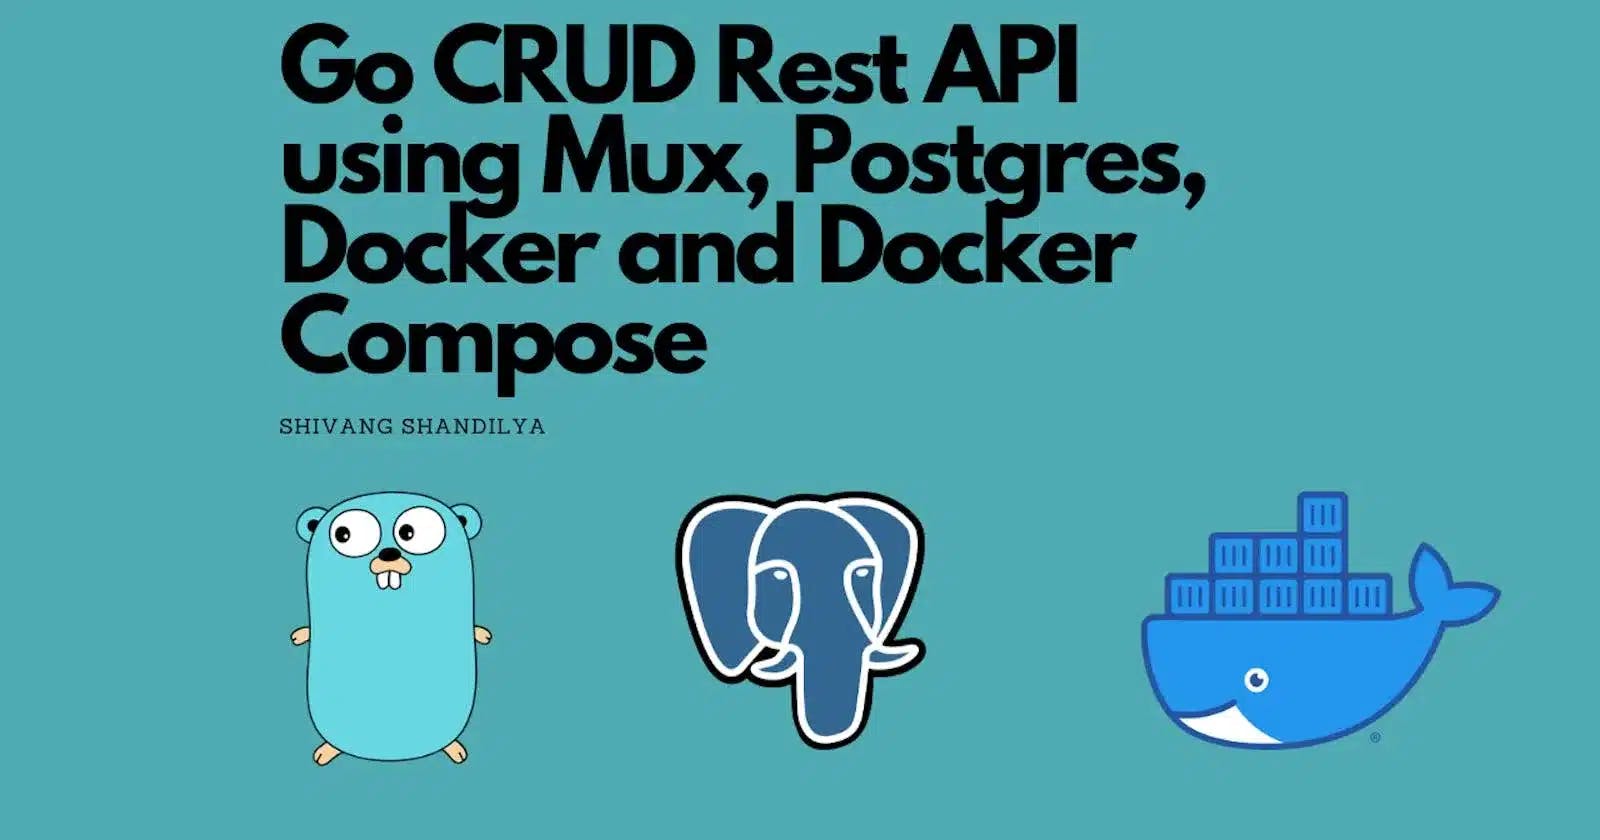 Cover Image for Building a GO CRUD Rest API from scratch